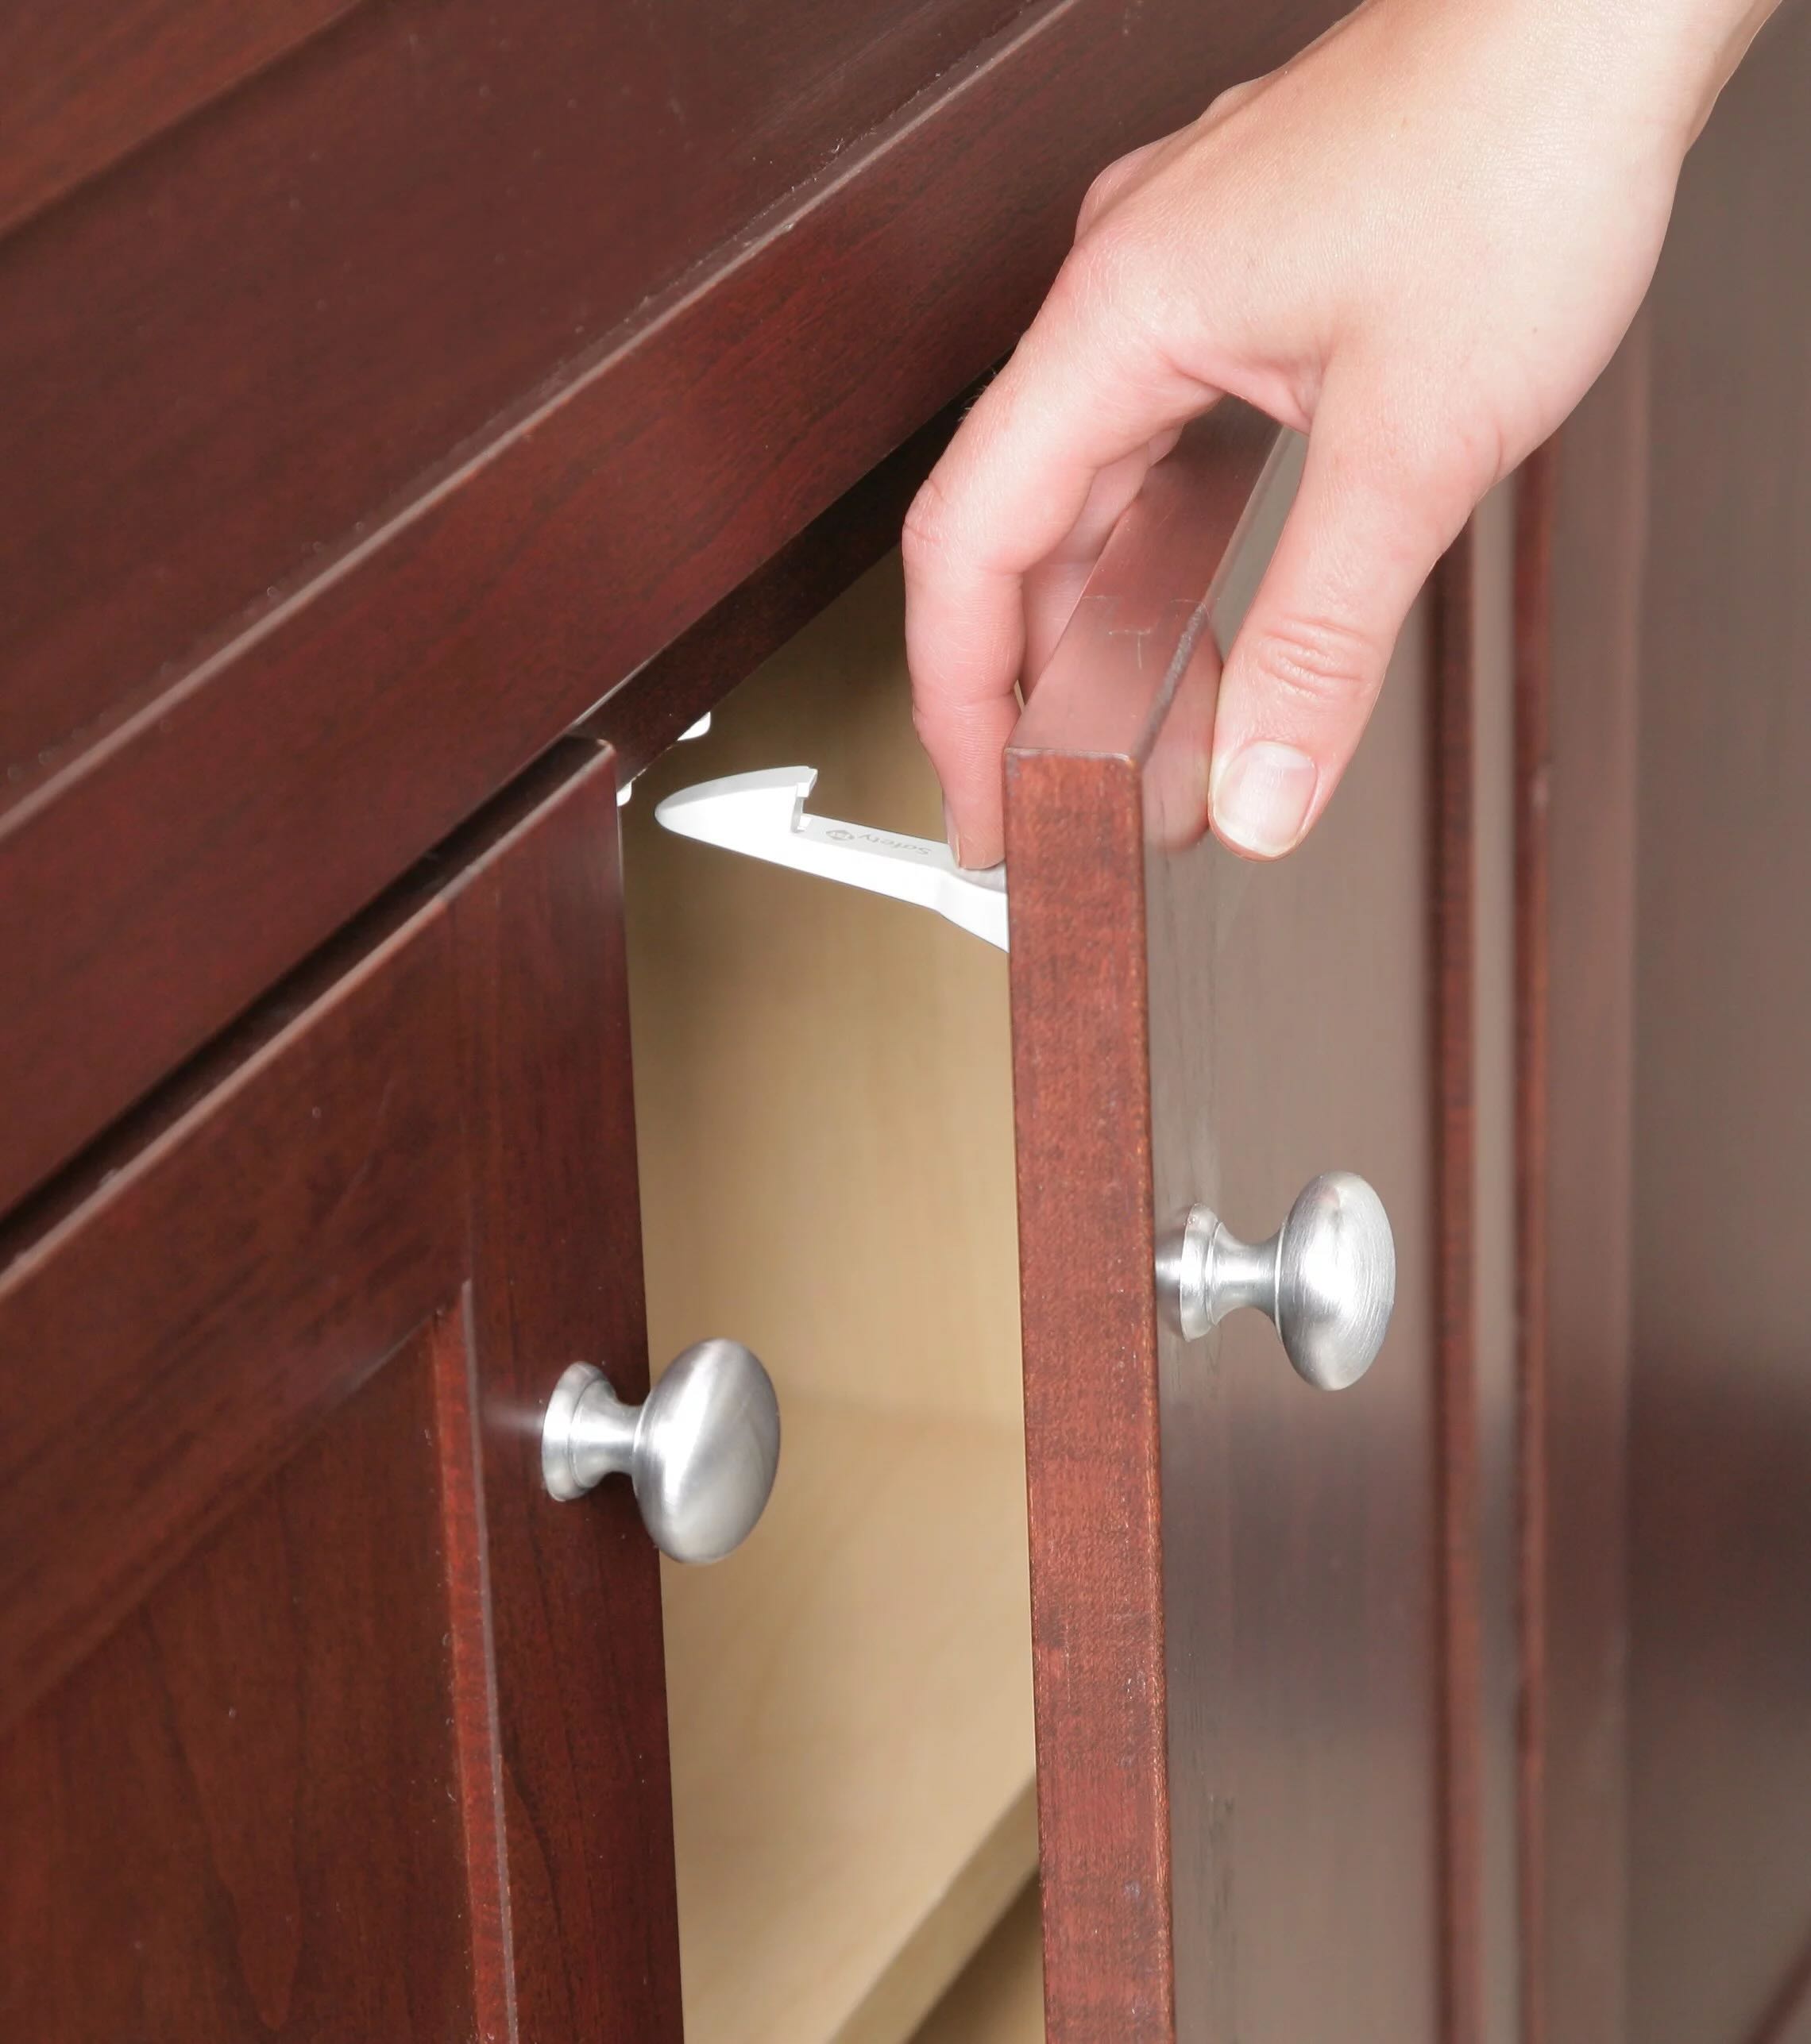 Cabinet Locks Review: The Best Options for Securing Your Cabinets